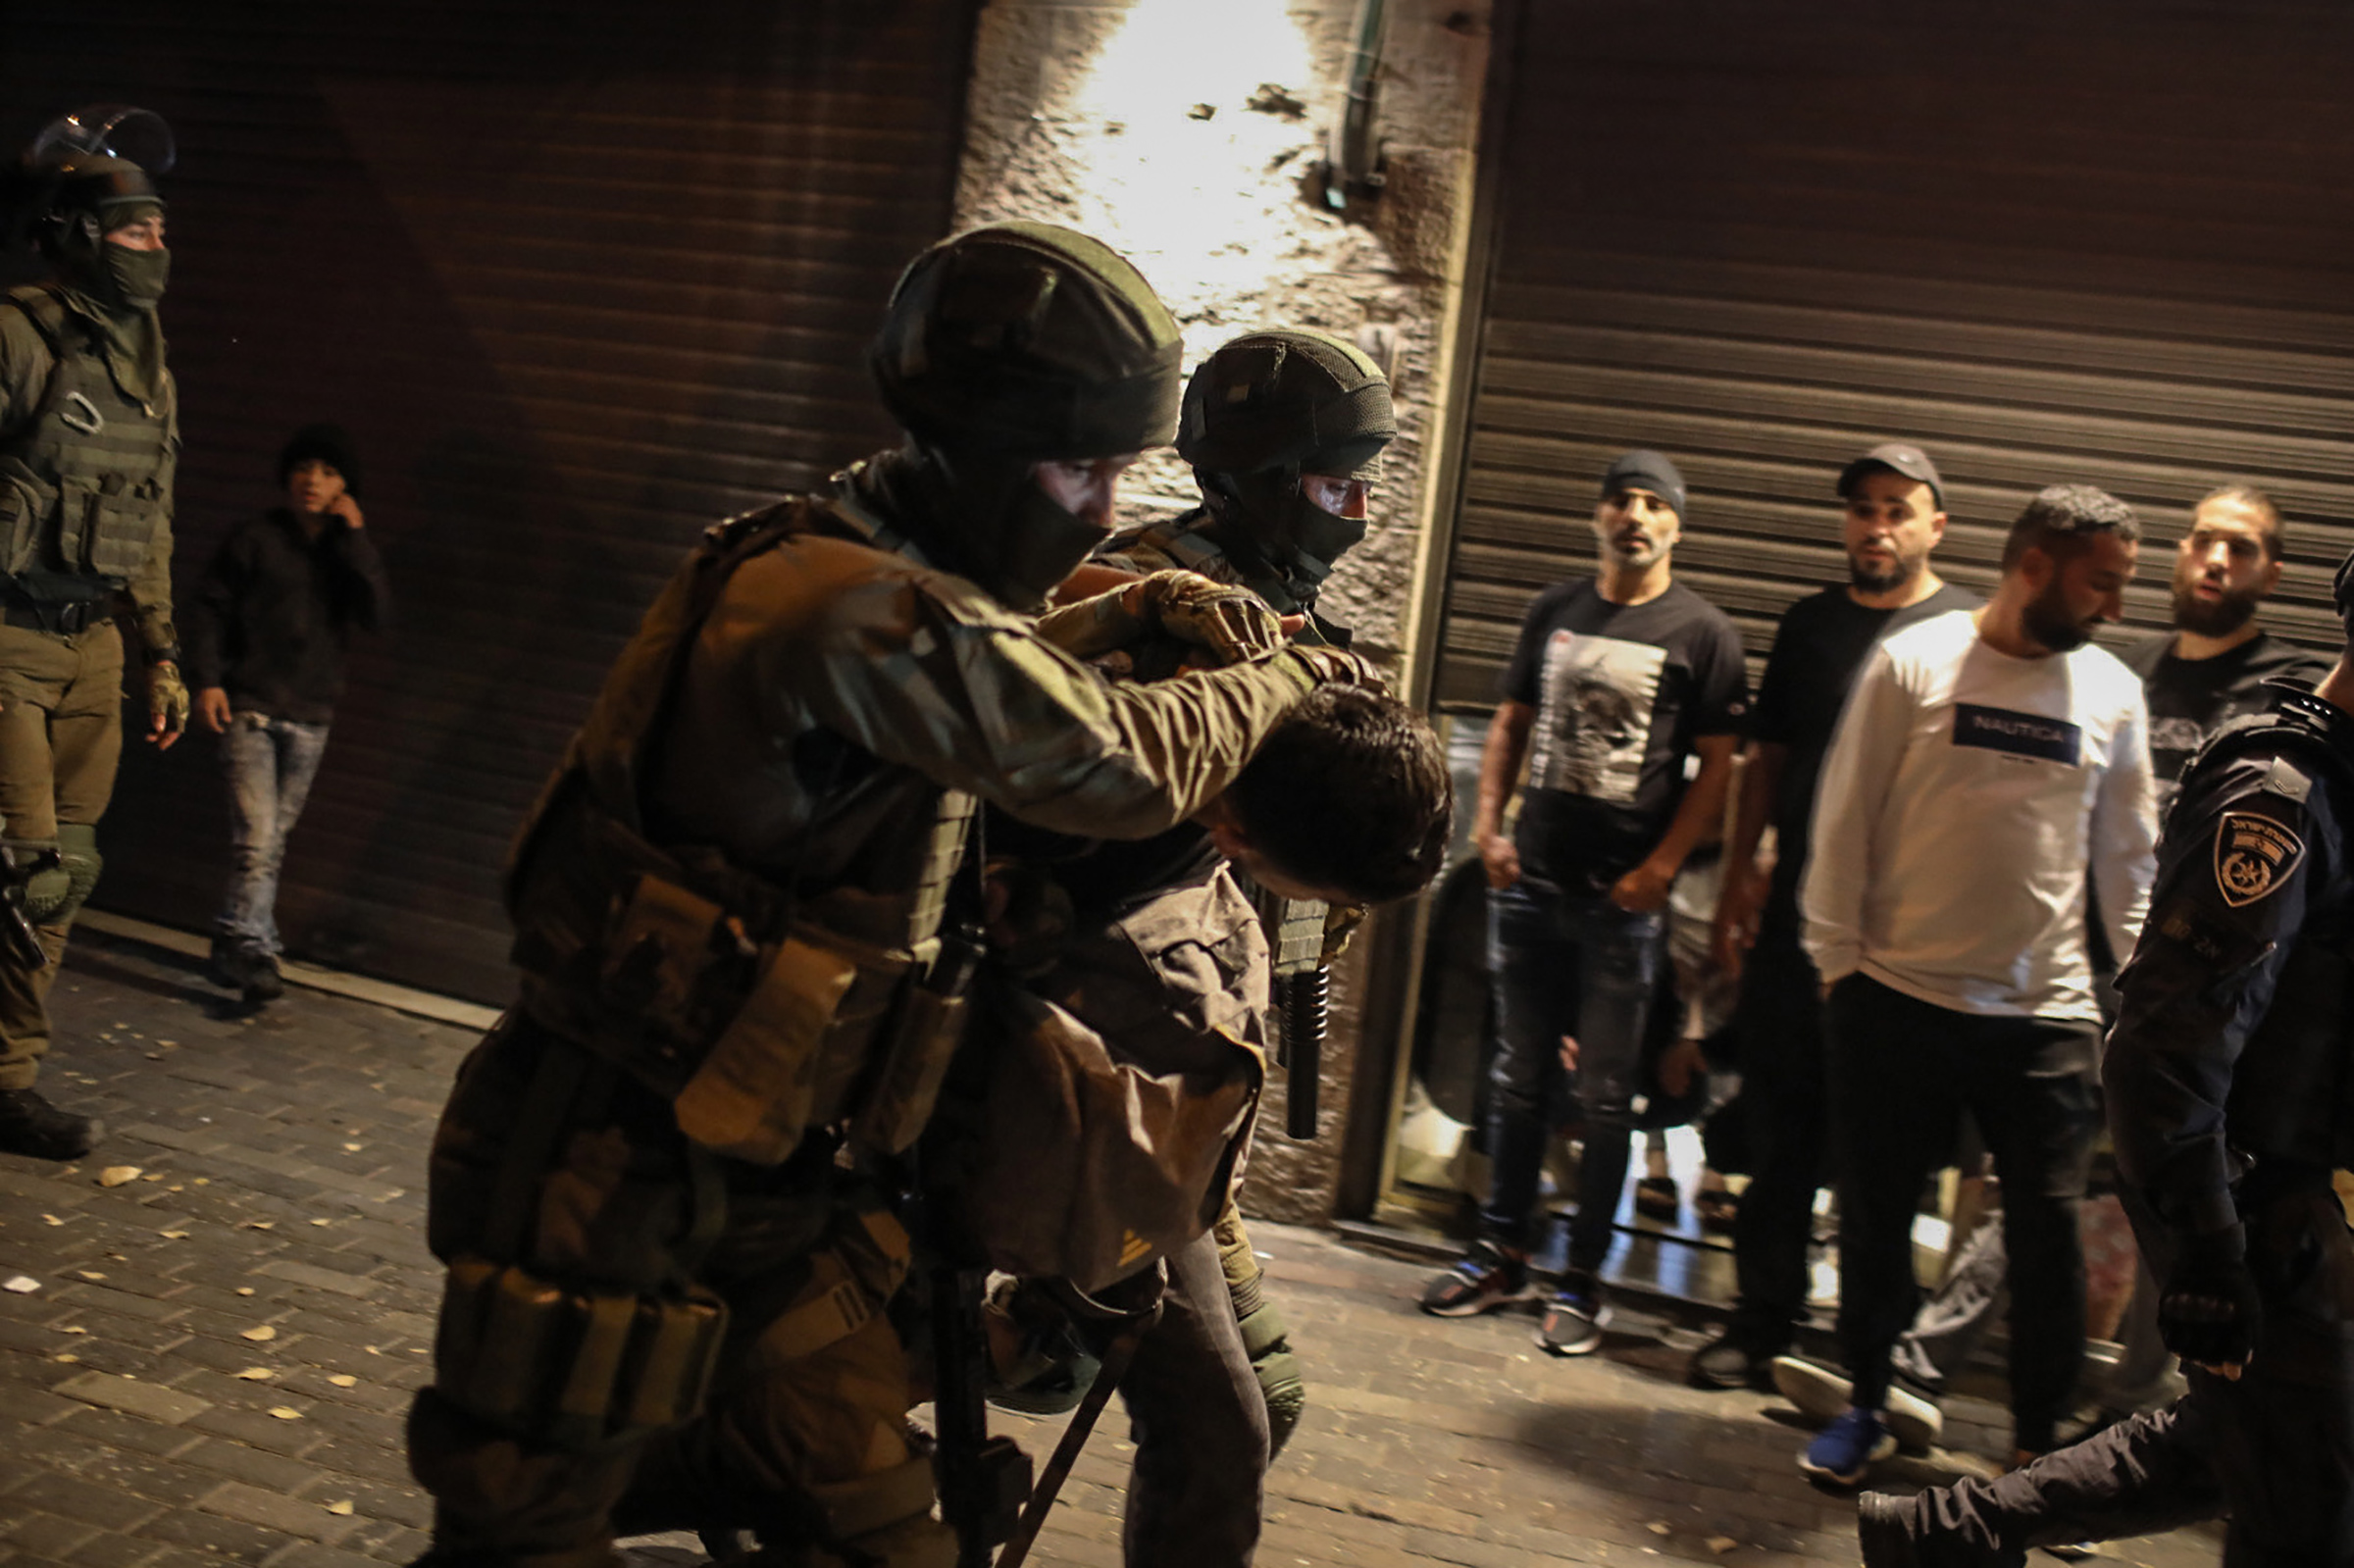 Israeli security forces arrest a man during a demonstration against the planned eviction process for the Palestinians in the Sheikh Jarrah neighbourhood of Jerusalem, on May 7, 2021.